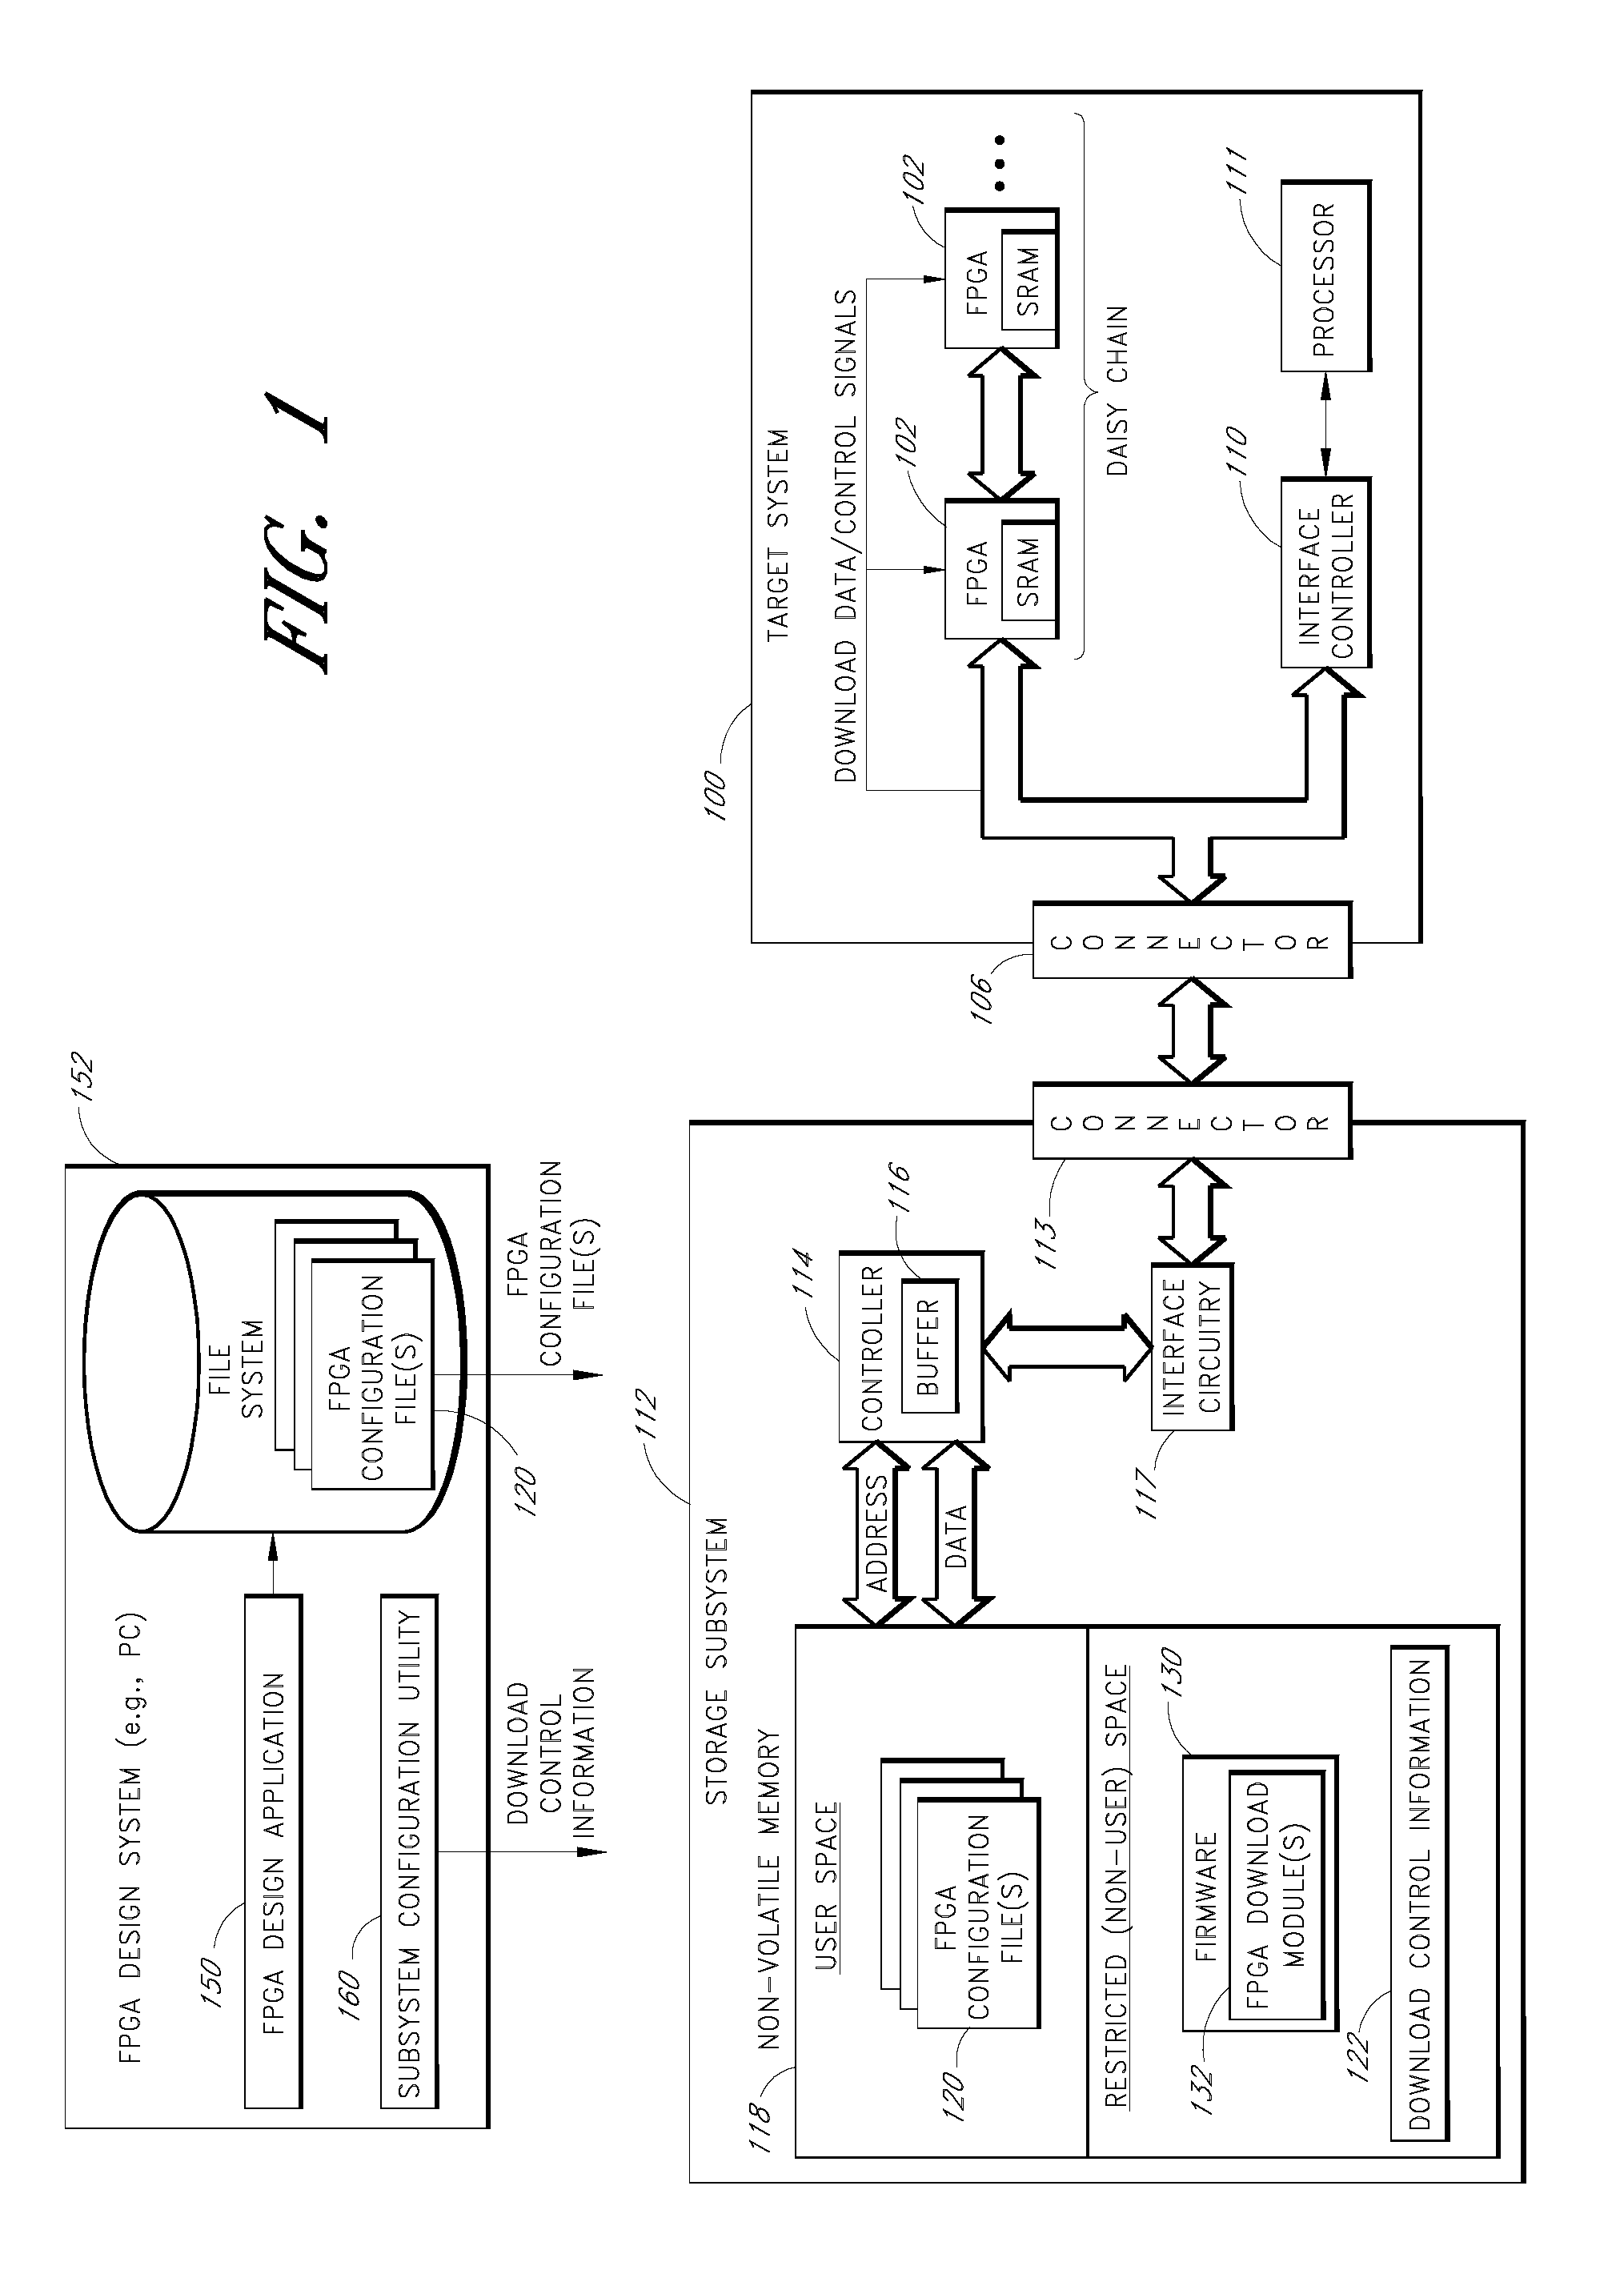 Storage subsystem capable of programming field-programmable devices of a target computer system